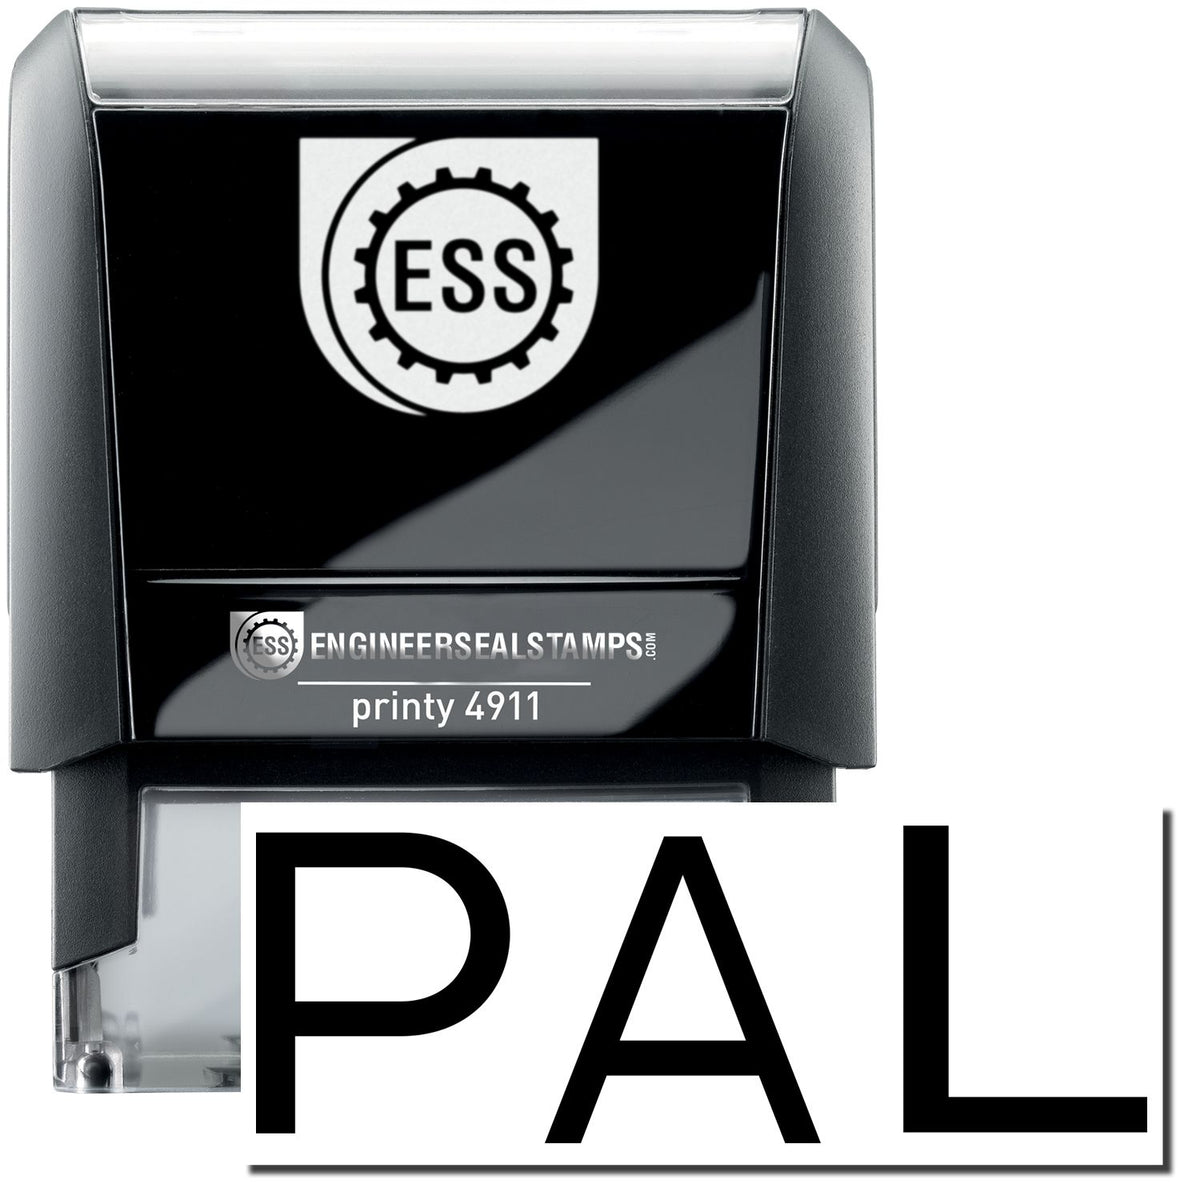 A self-inking stamp with a stamped image showing how the text &quot;PAL&quot; is displayed after stamping.